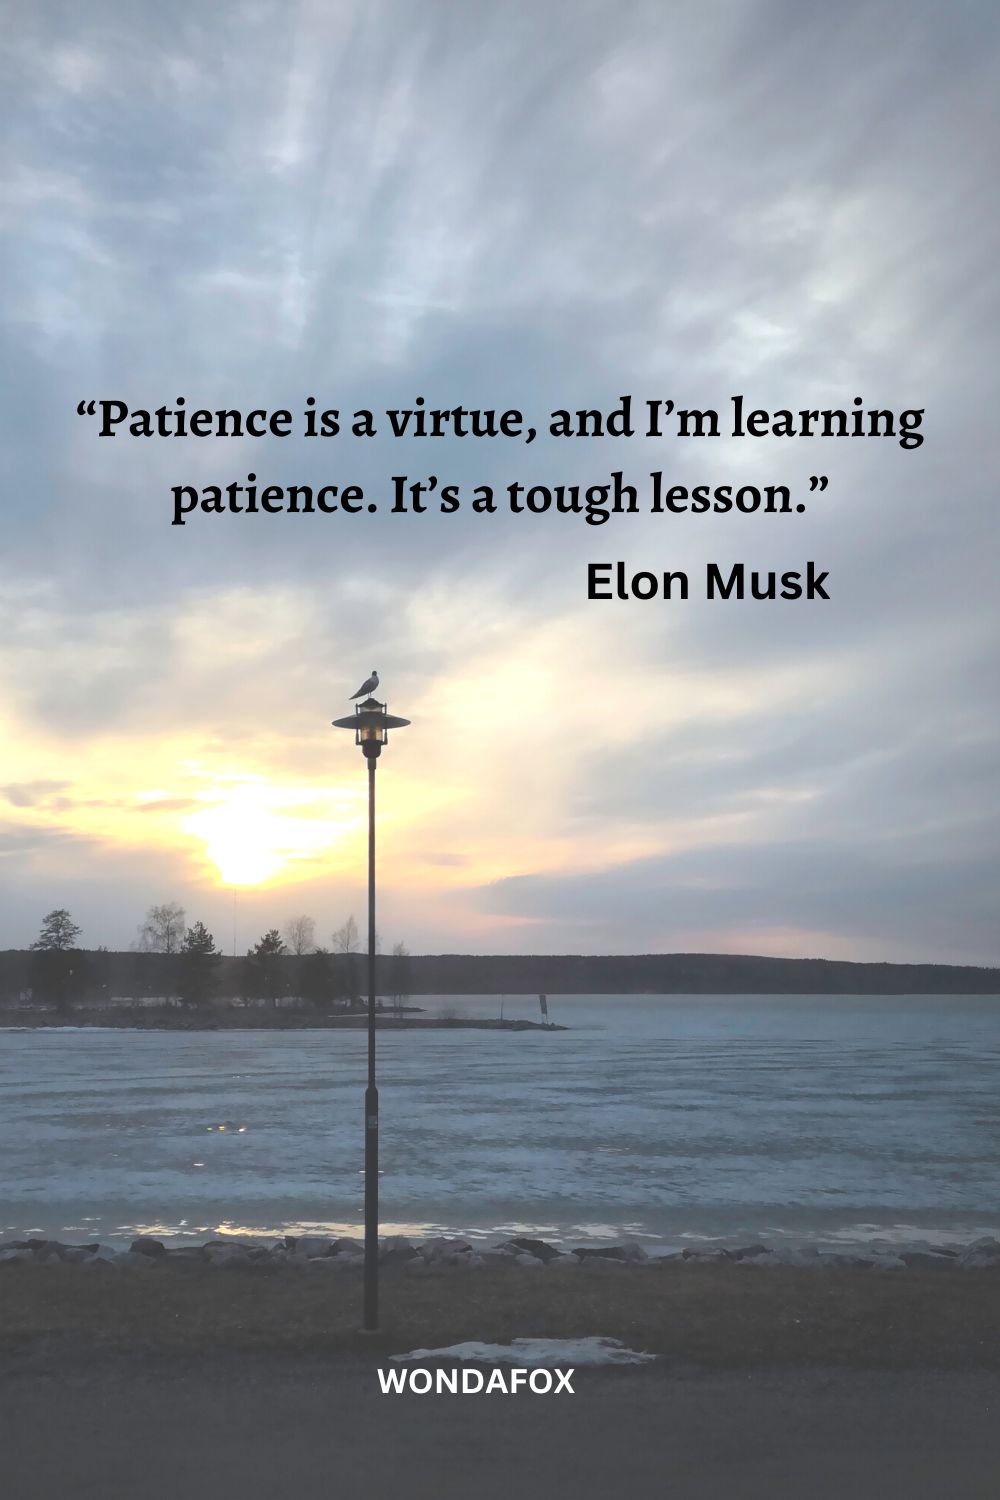 “Patience is a virtue, and I’m learning patience. It’s a tough lesson.”
Elon Musk